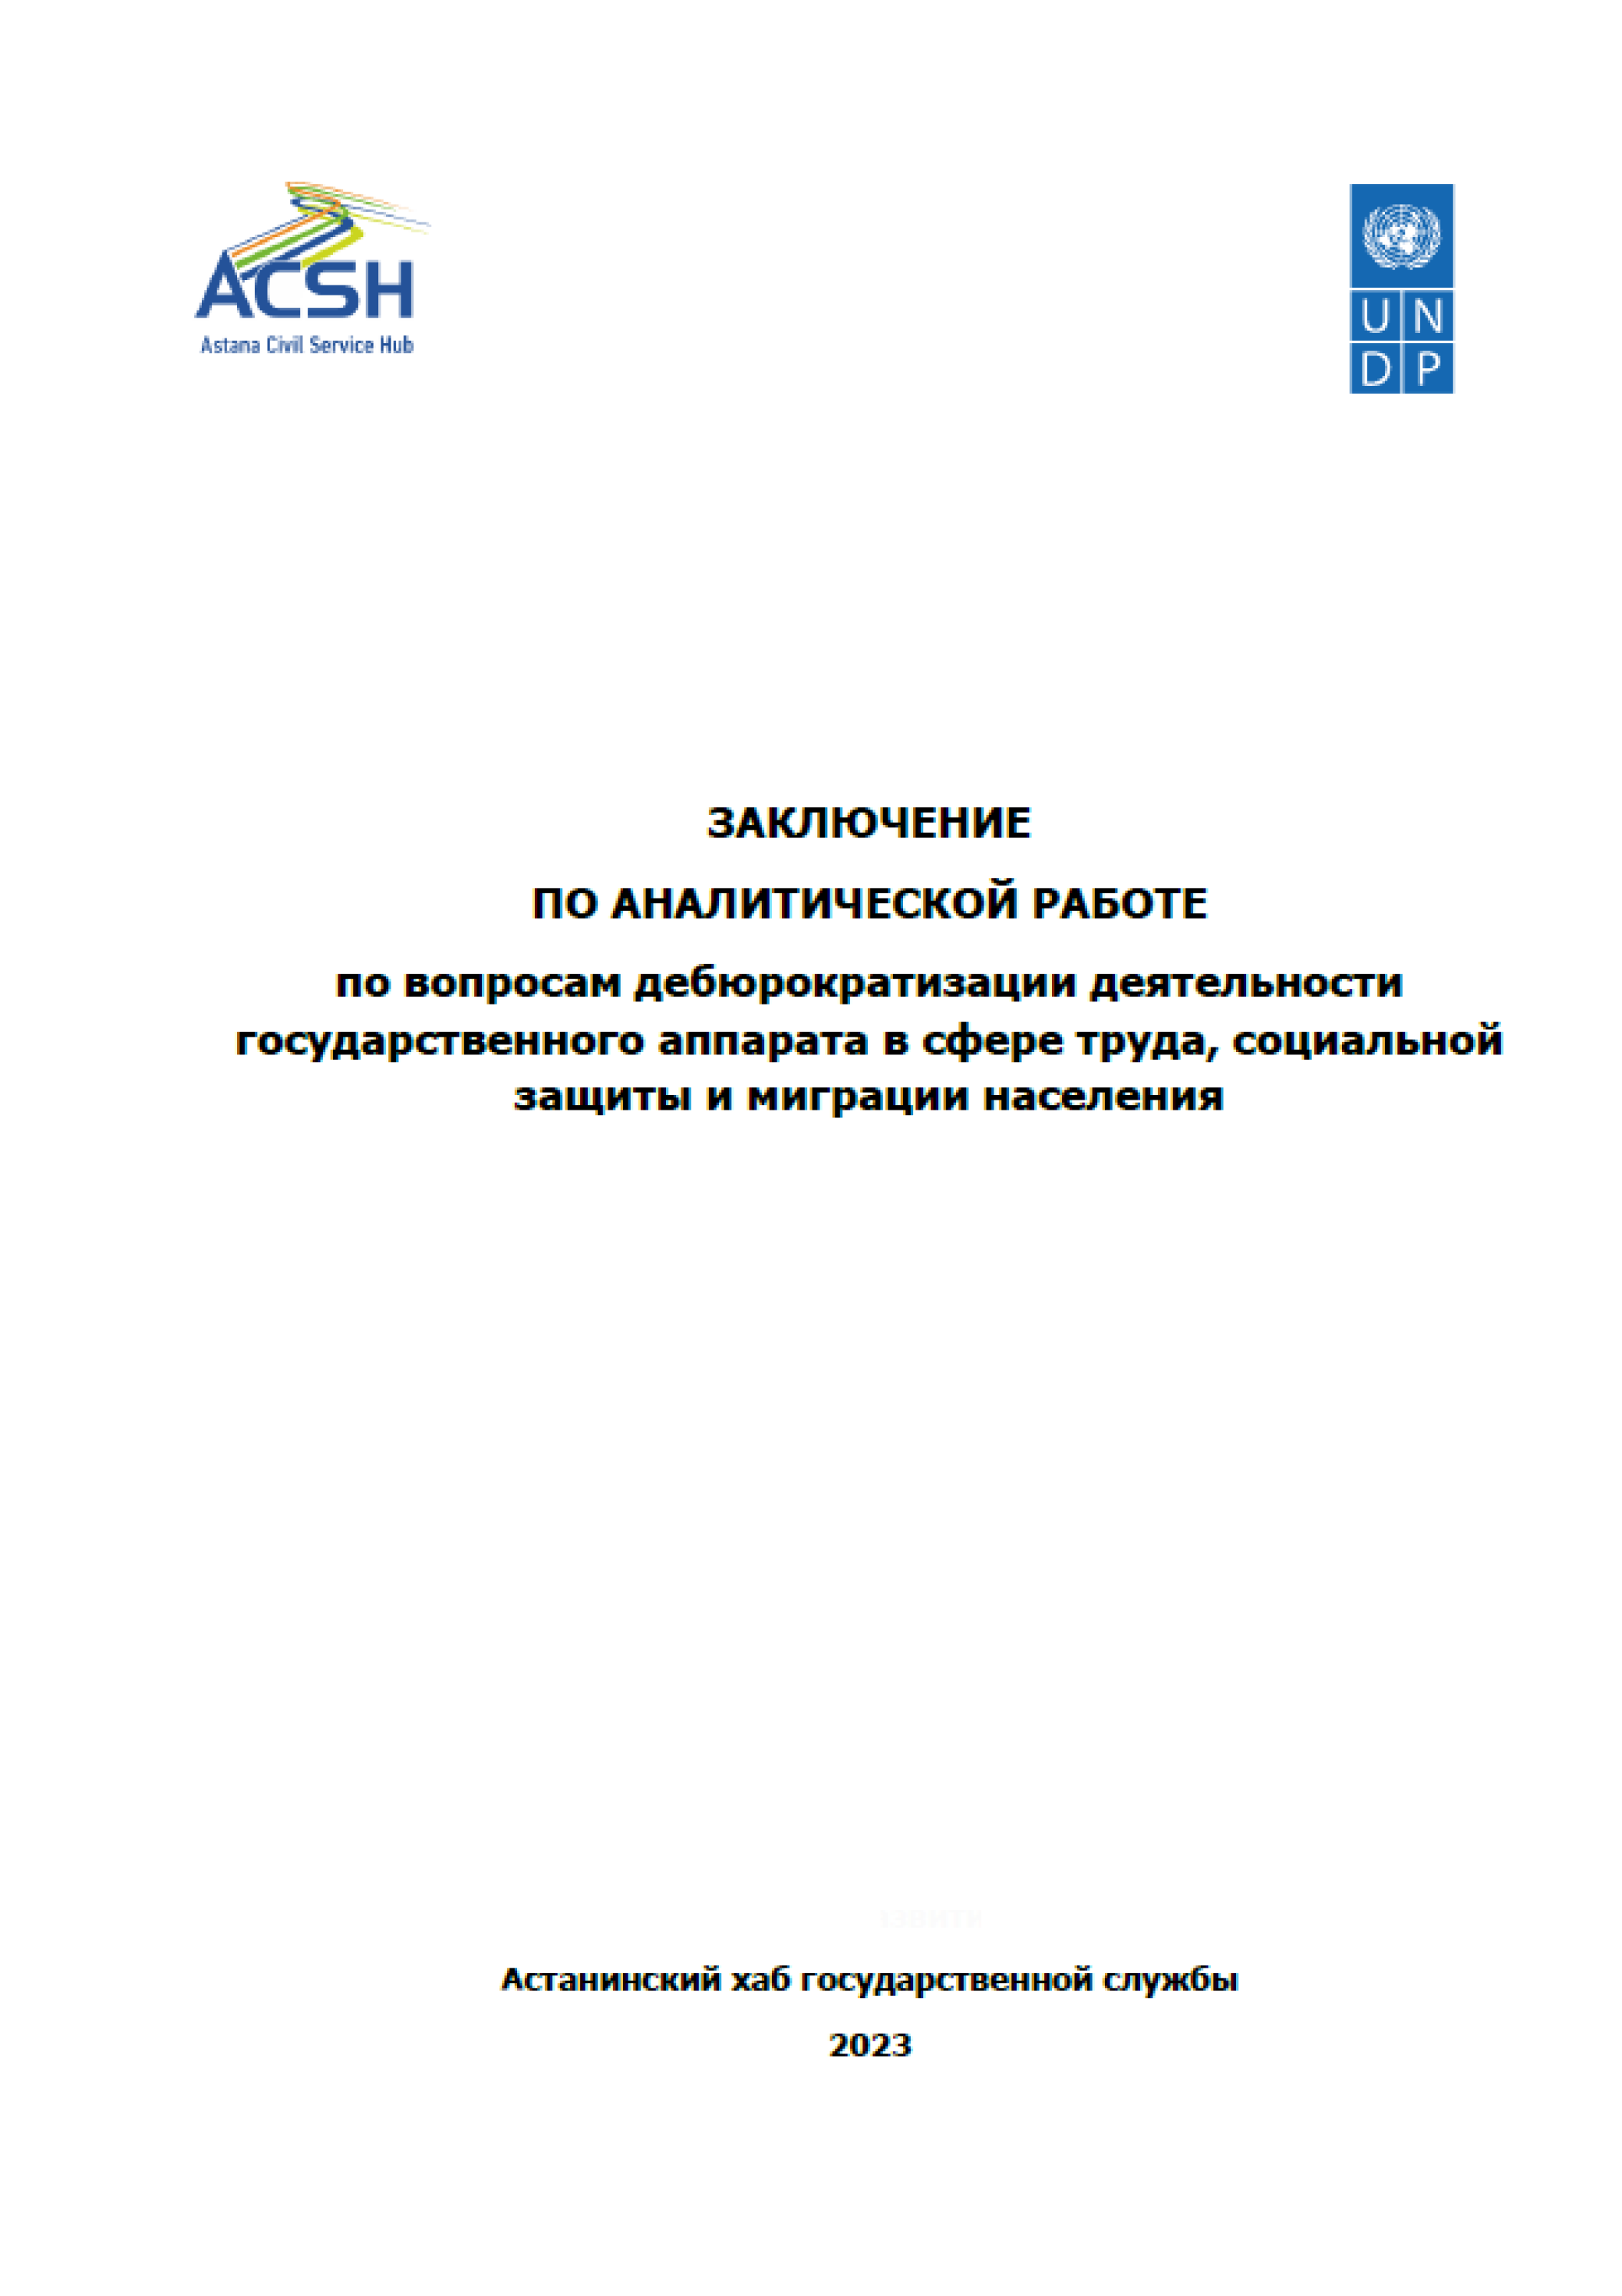 Conclusion on the analytical work on the issues of de-bureaucratization of the activities of the state apparatus in the field of labor, social protection, and migration of the population